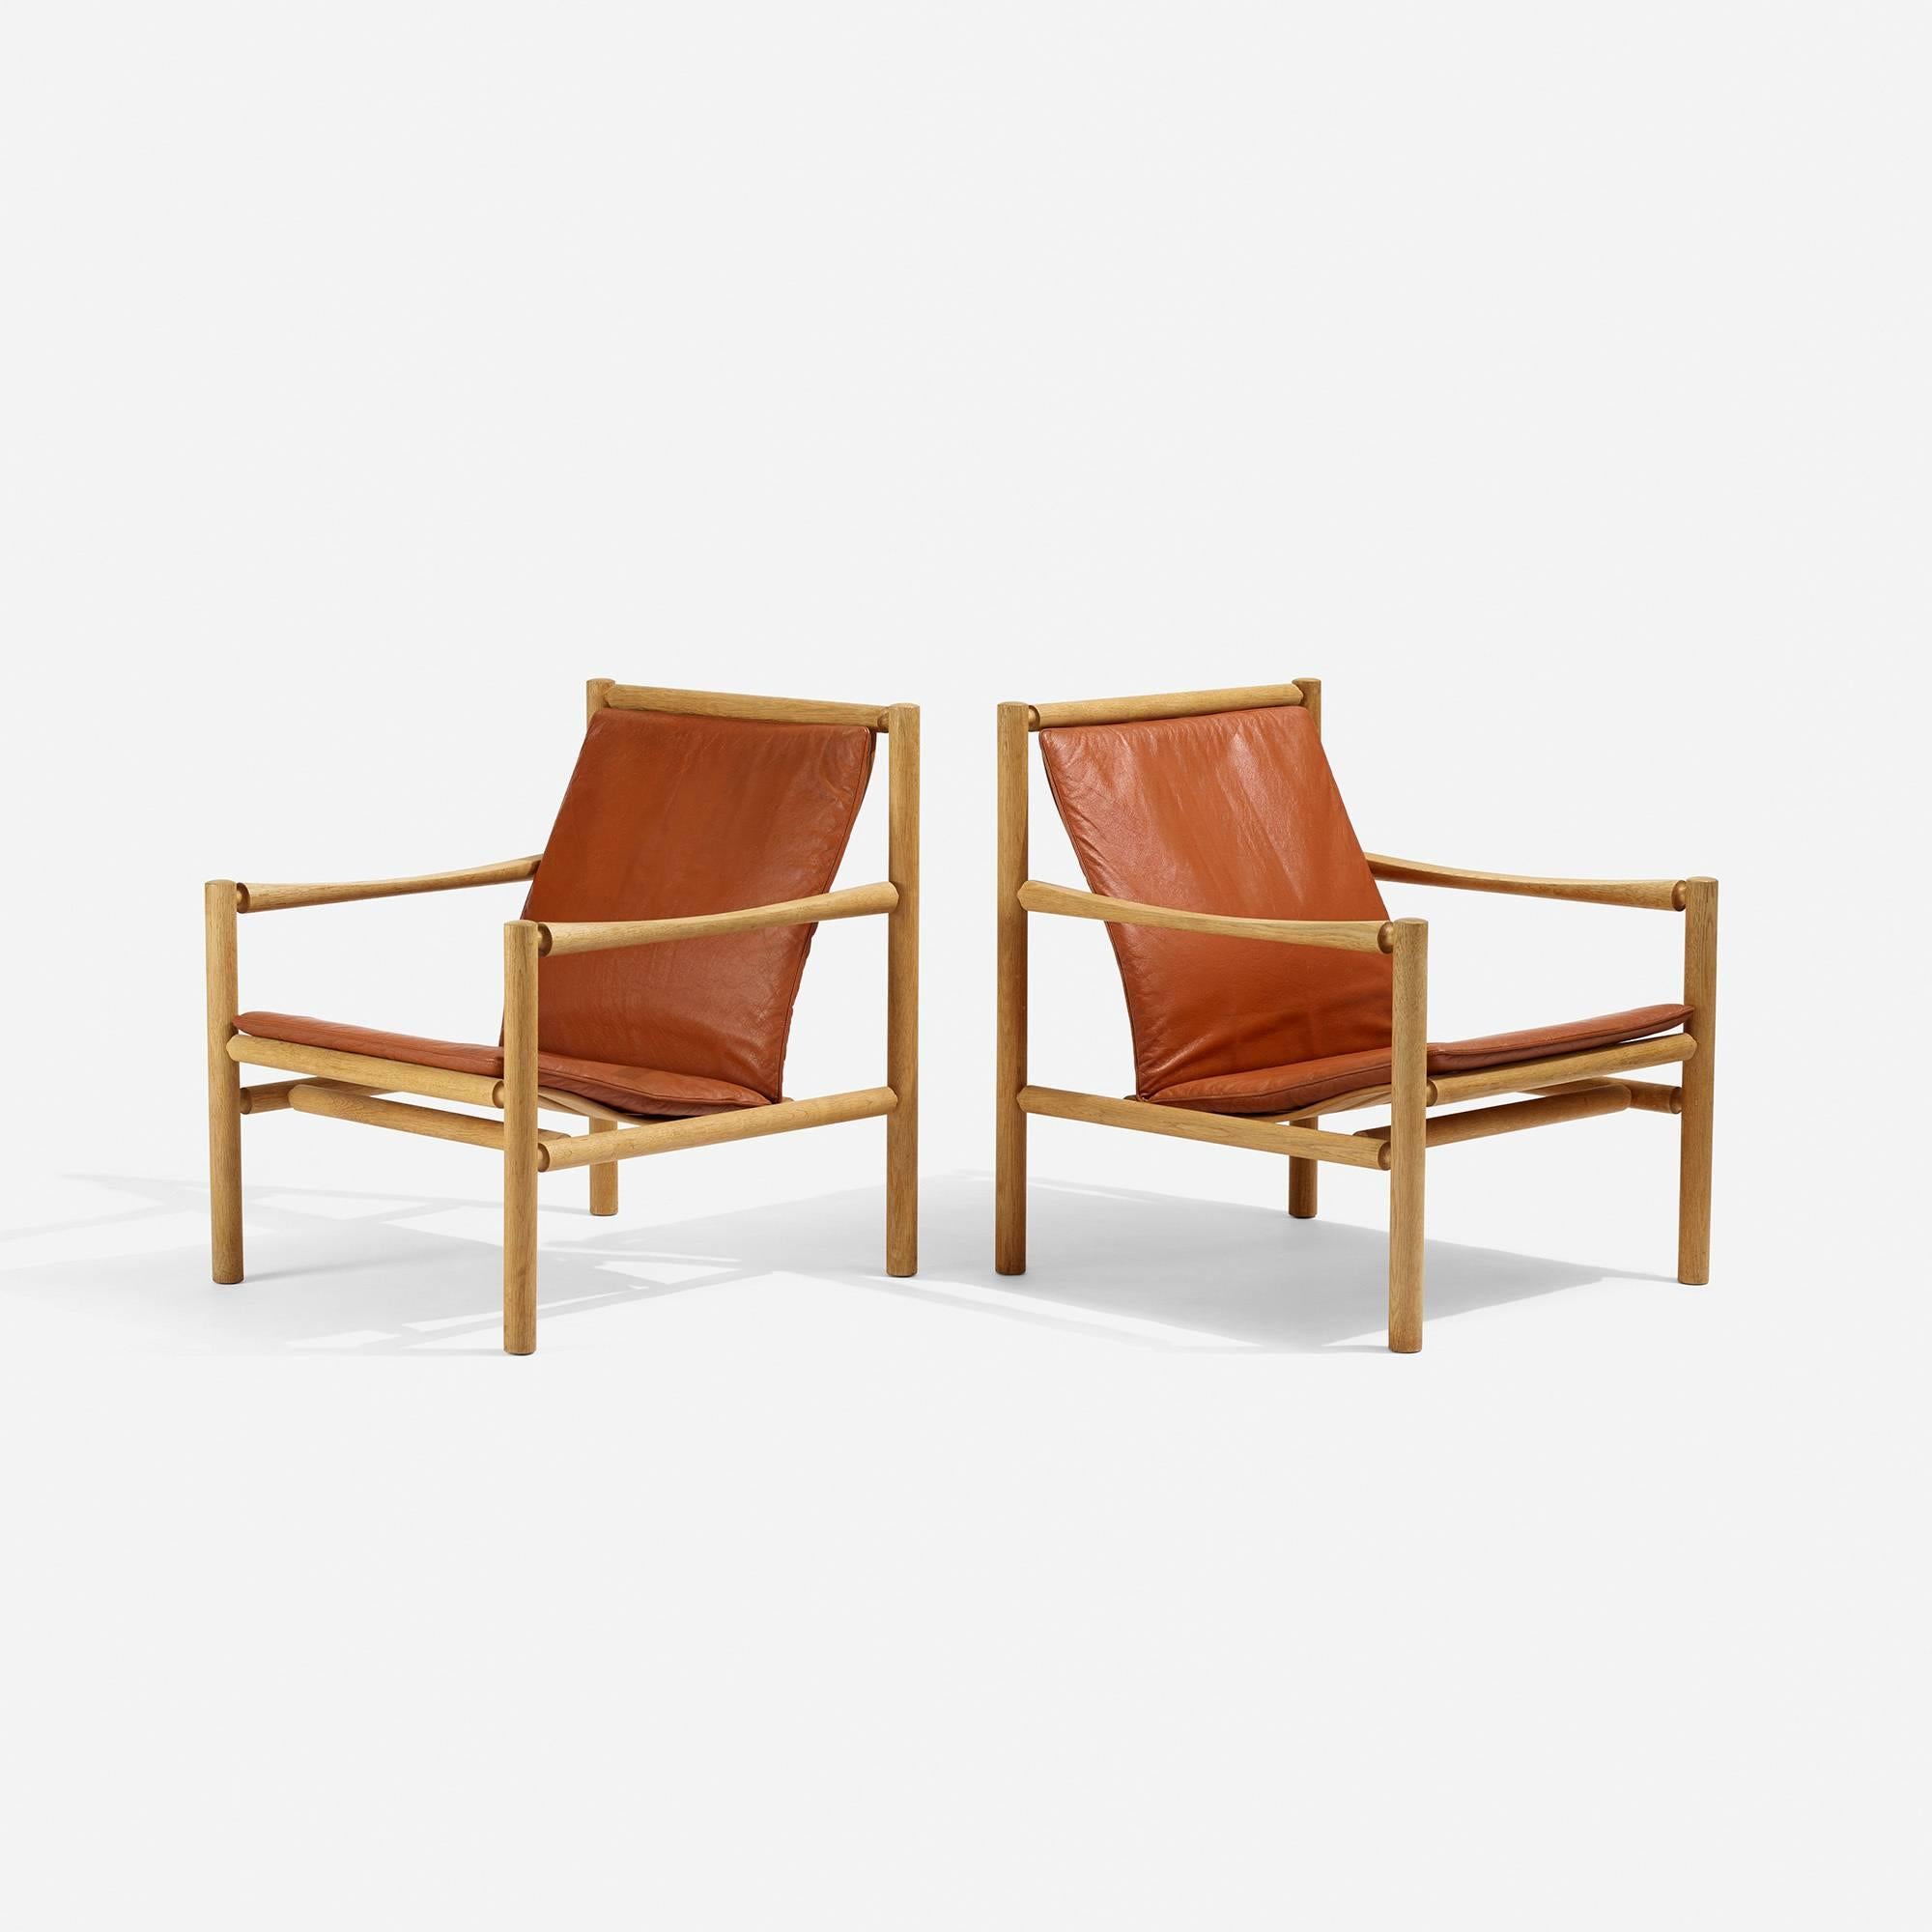 Soulful pair of leather and oak lounge chairs by Jorgen Nilsson.